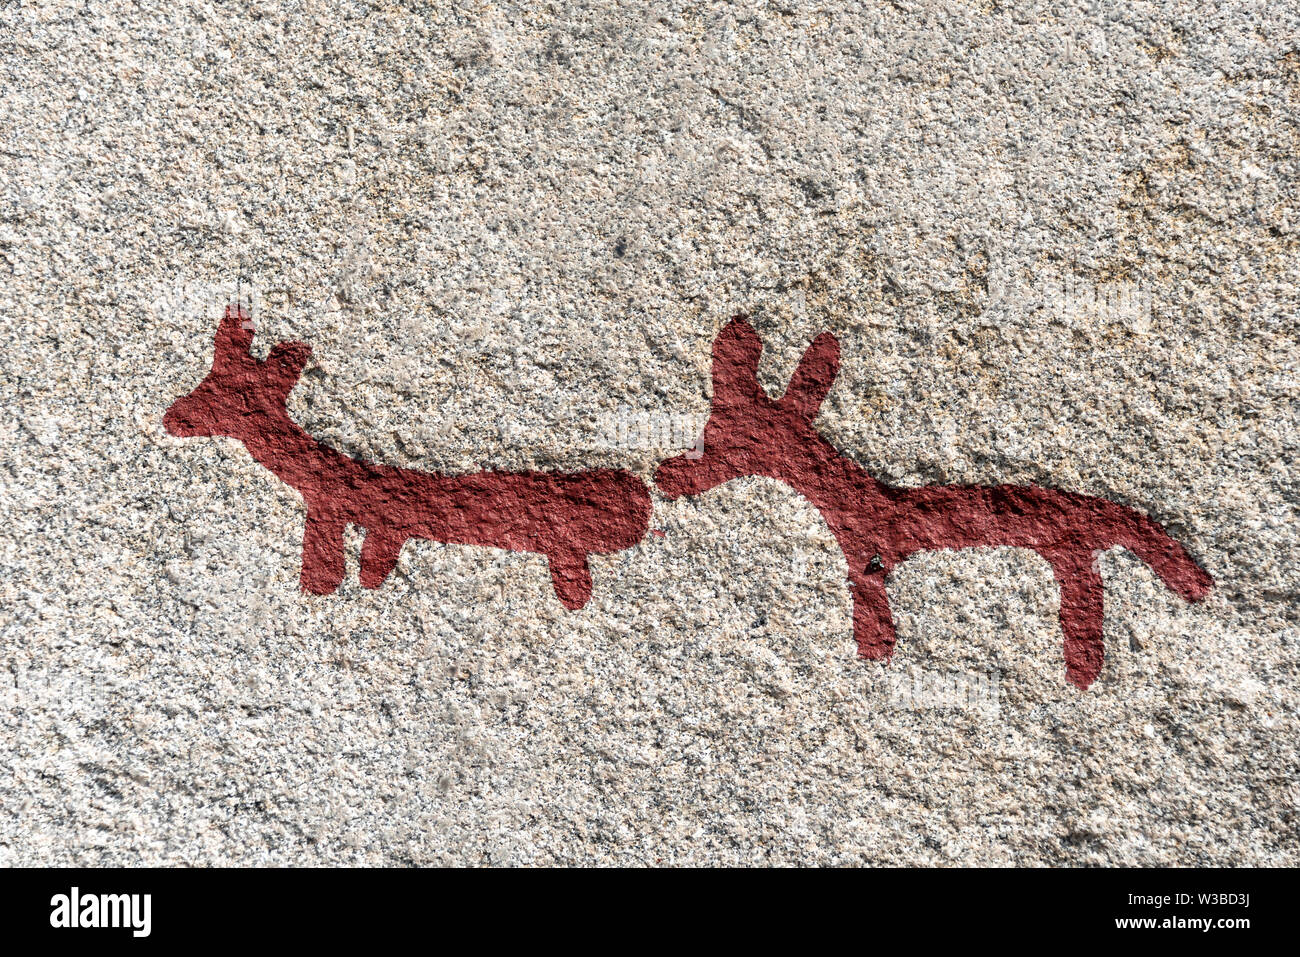 Tanumshede, Sweden - July 9, 2019: View of more than 2000 years old rock paintings in Tanumshede. The carvings belong to the Unesco World Heritage. Stock Photo